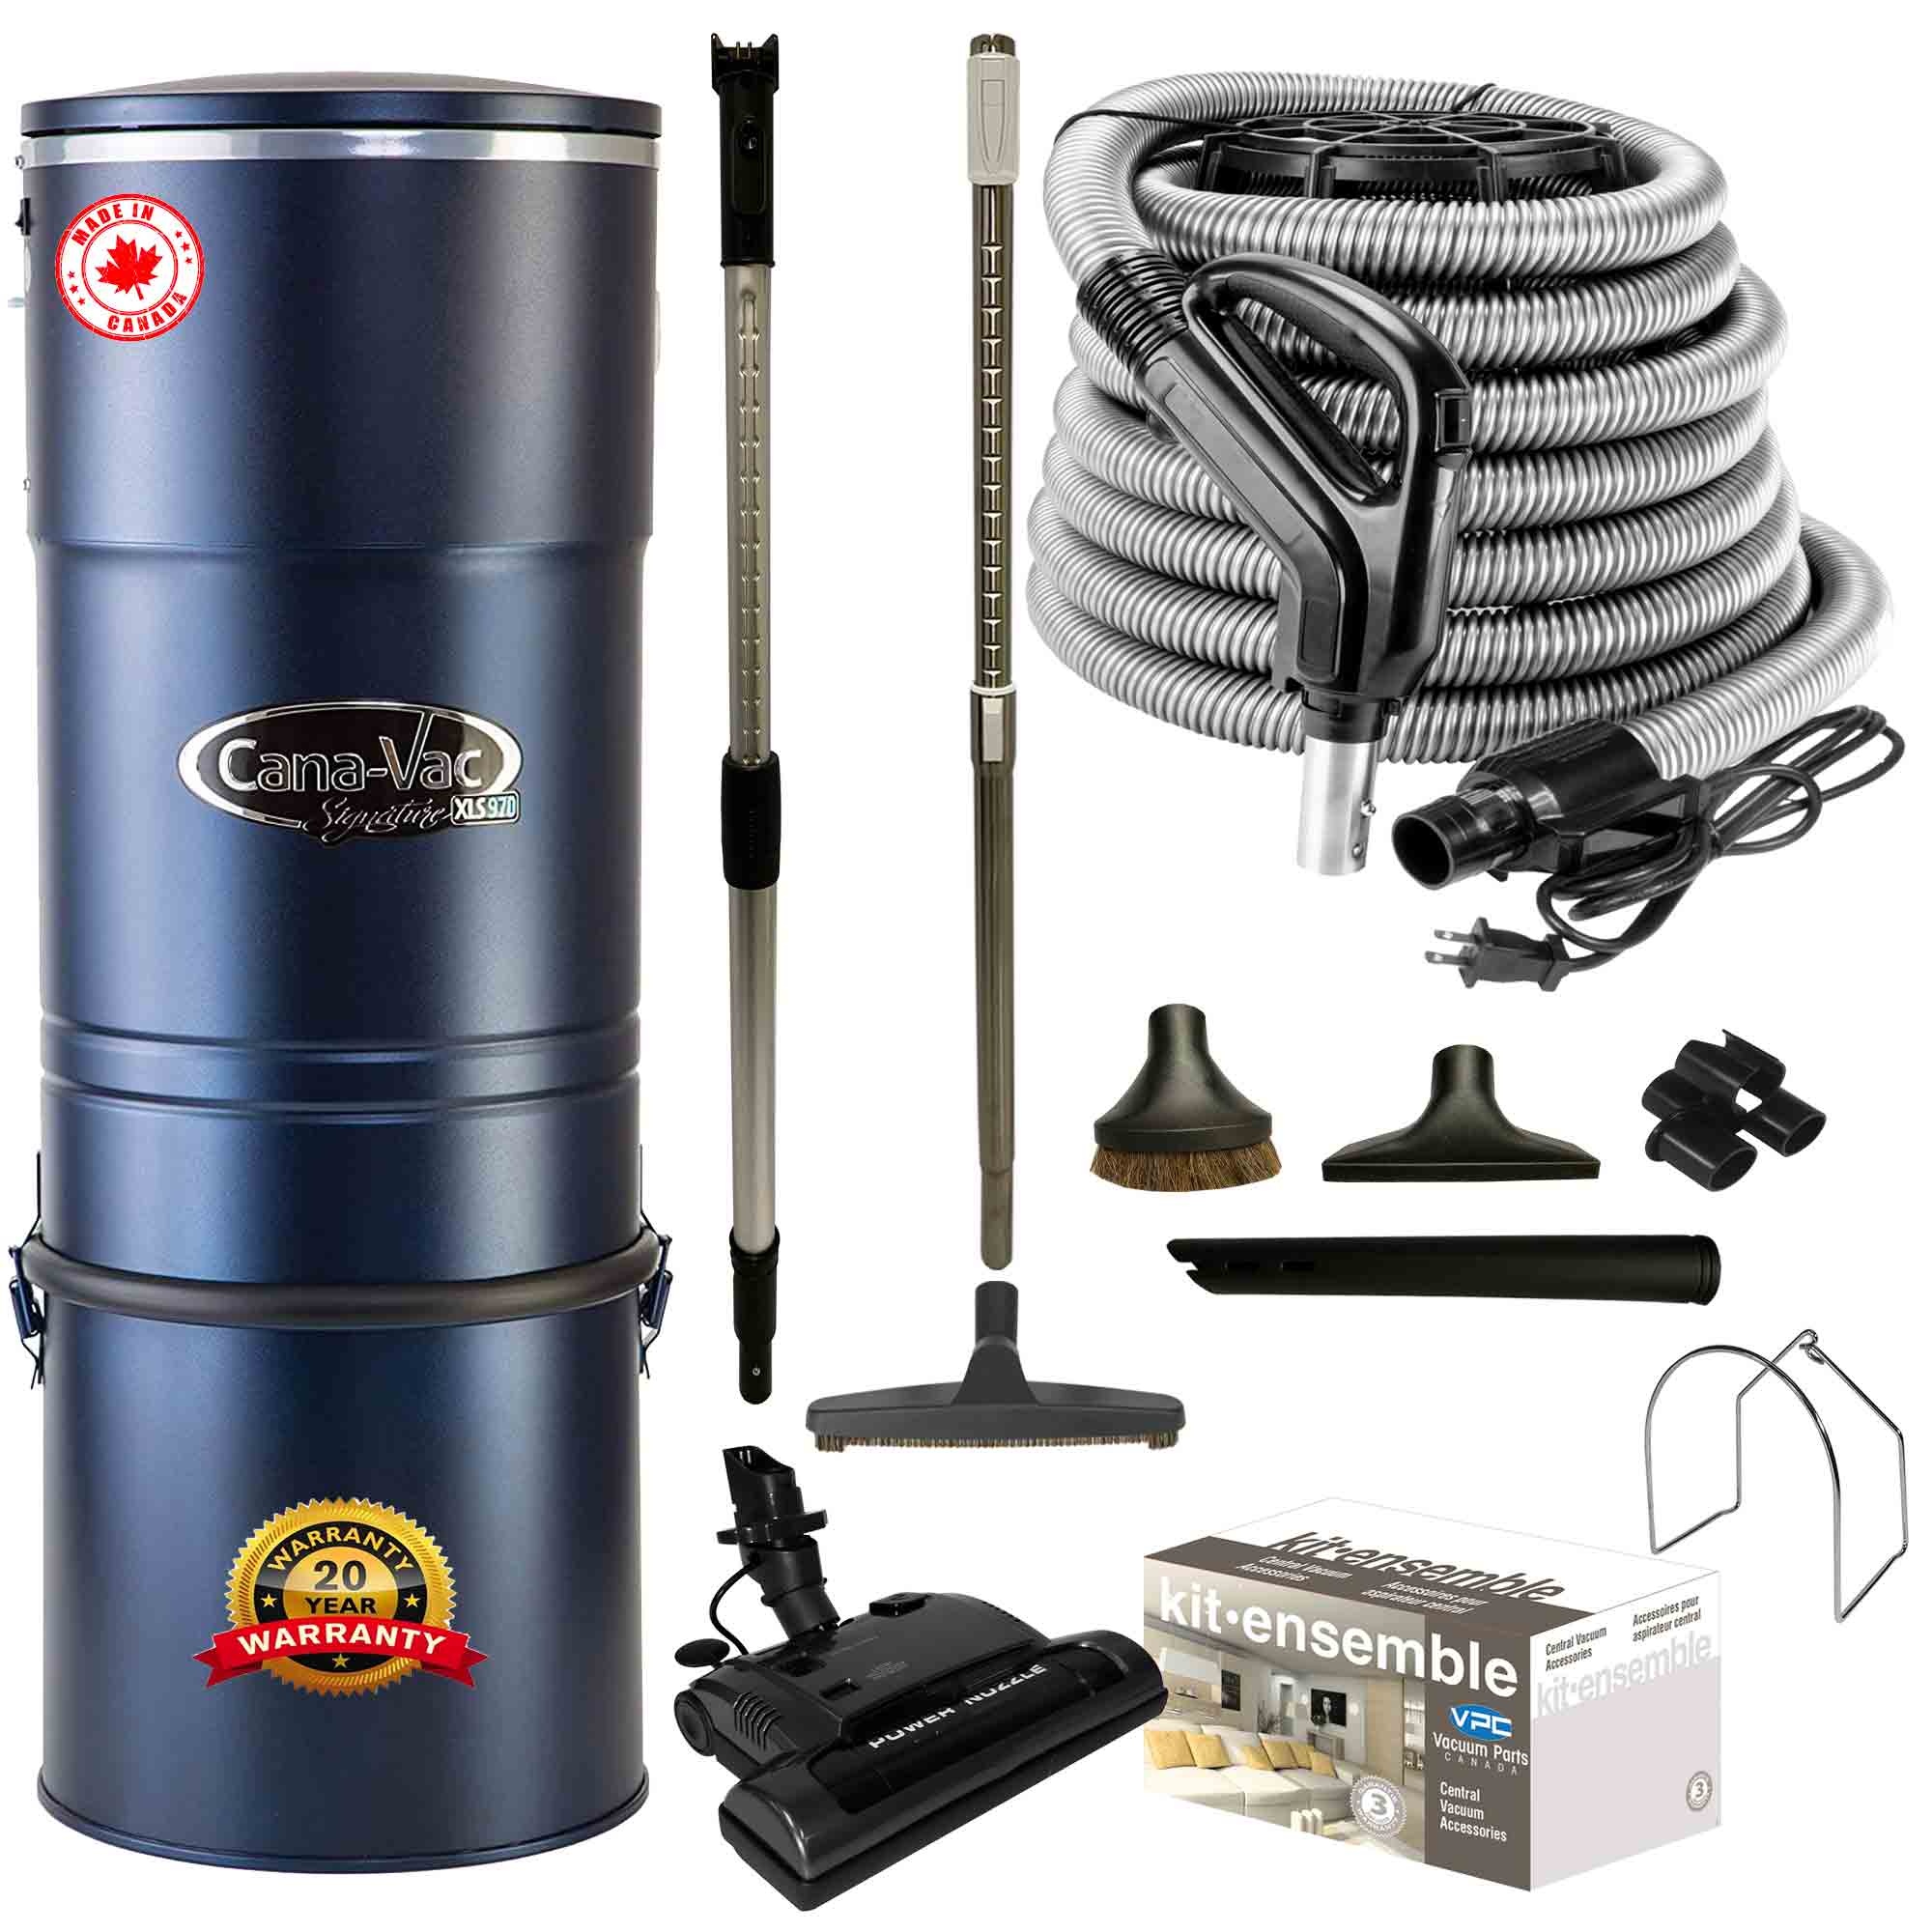 Cana-Vac XLS990 Central Vacuum with Standard Electric Package (Black)